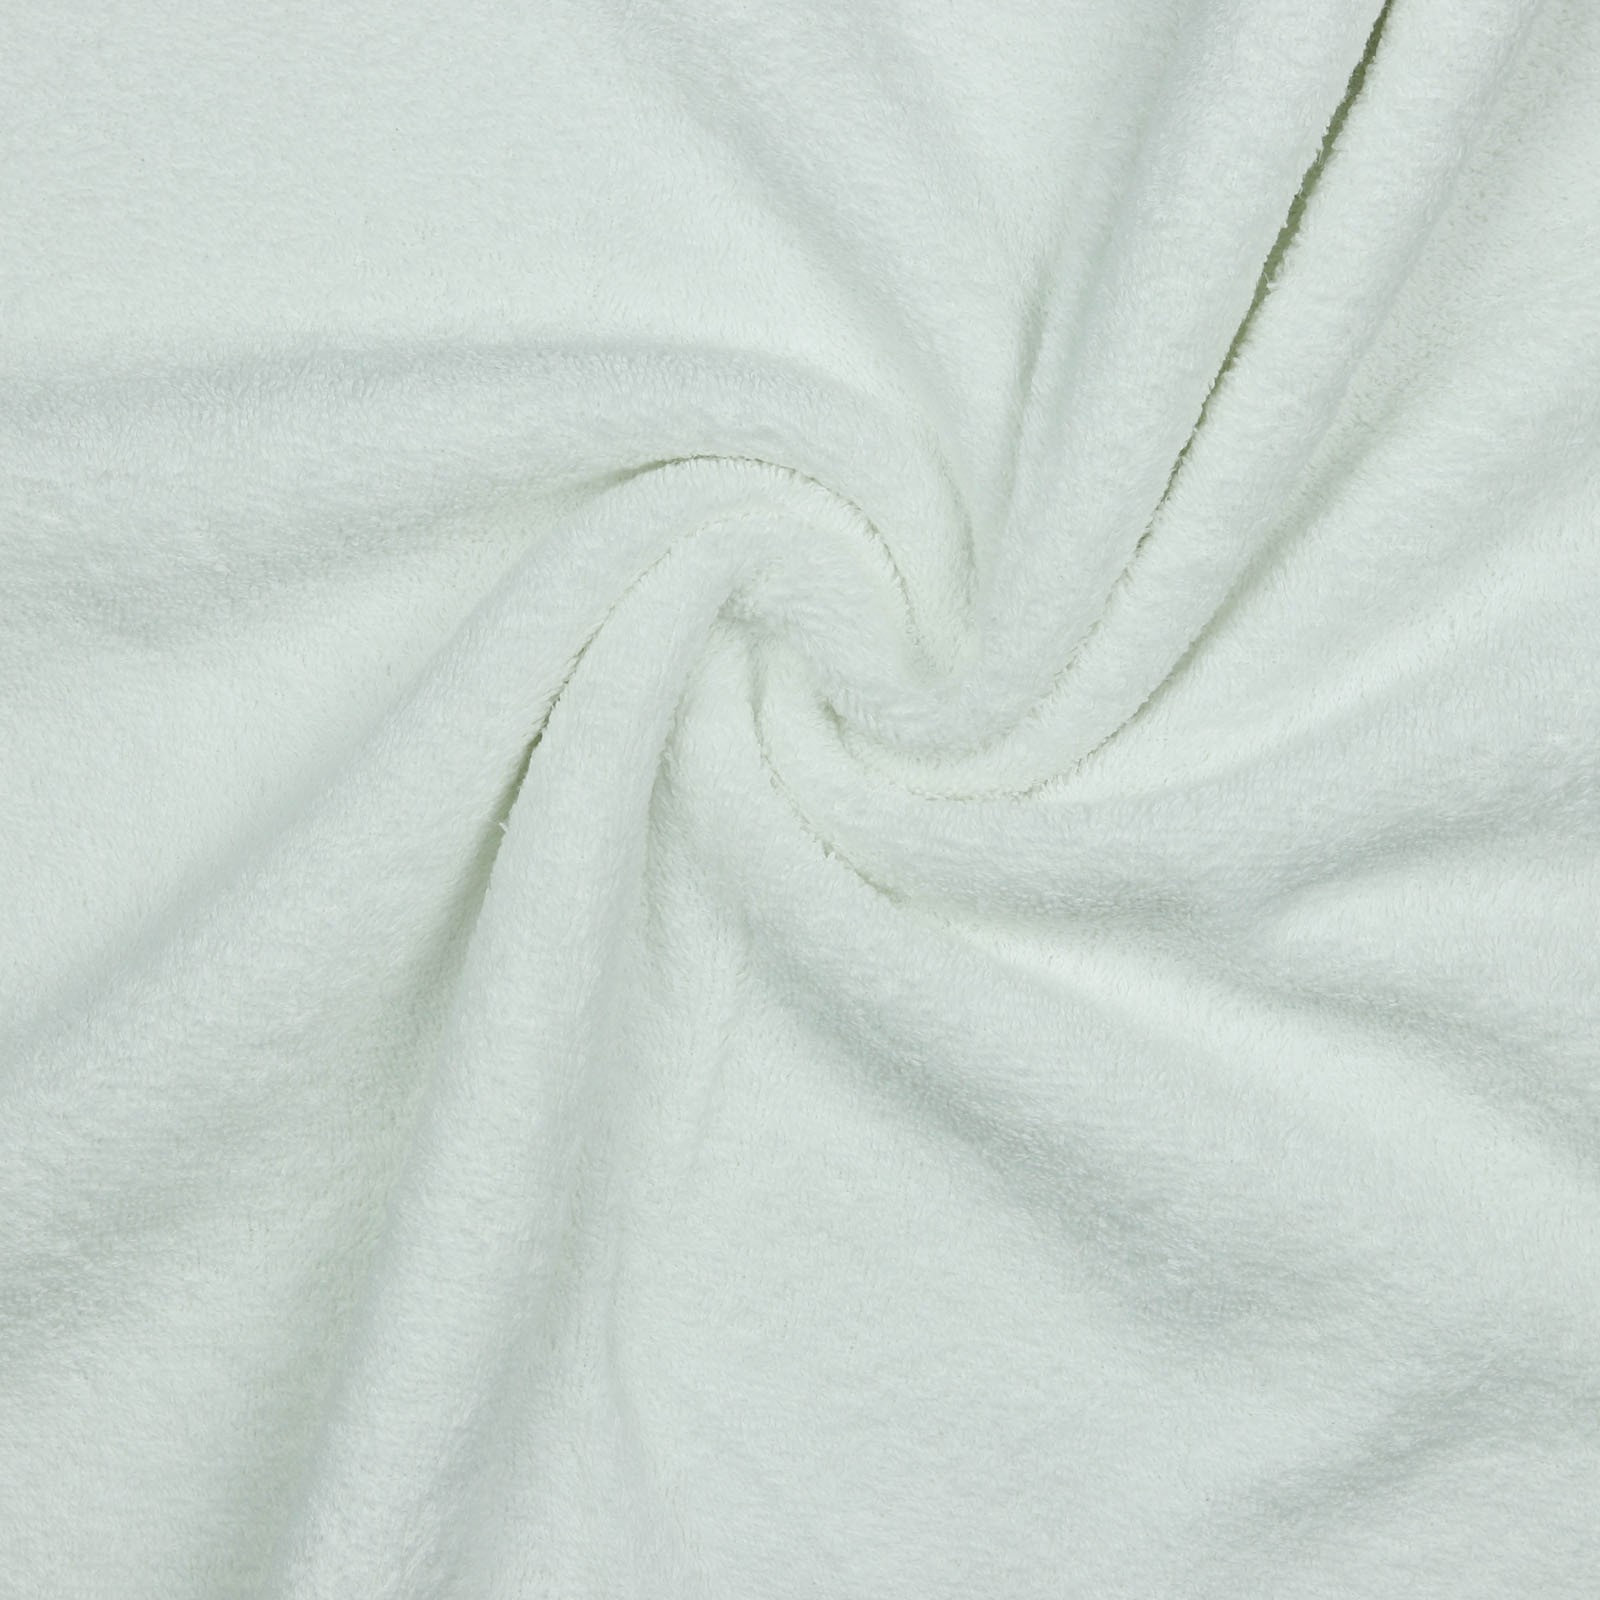 White Solid Terry Cloth Cotton Fabric by the Yard